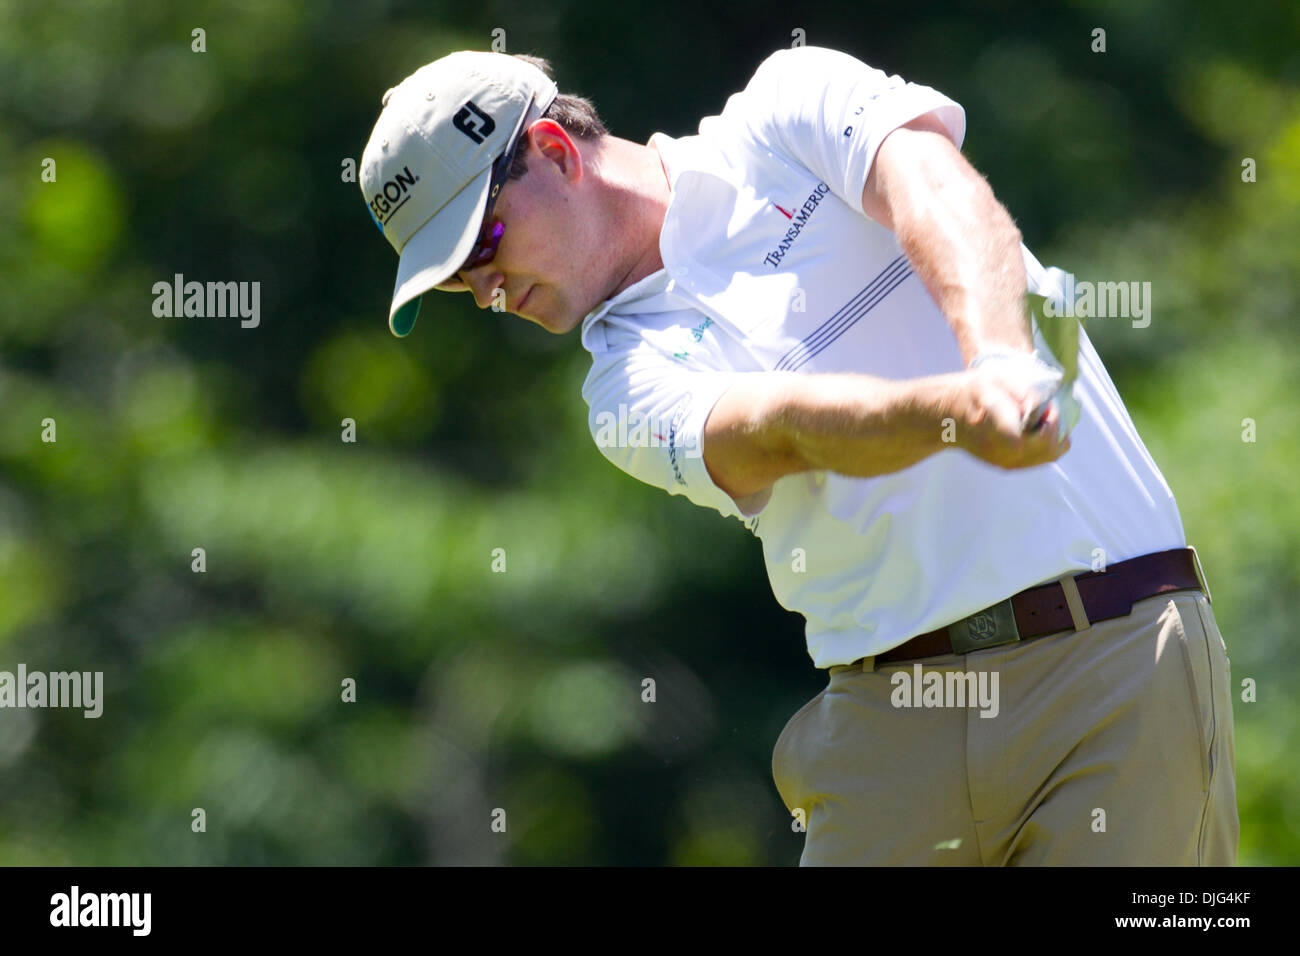 Zach Johnson High Resolution Stock Photography and Images - Alamy